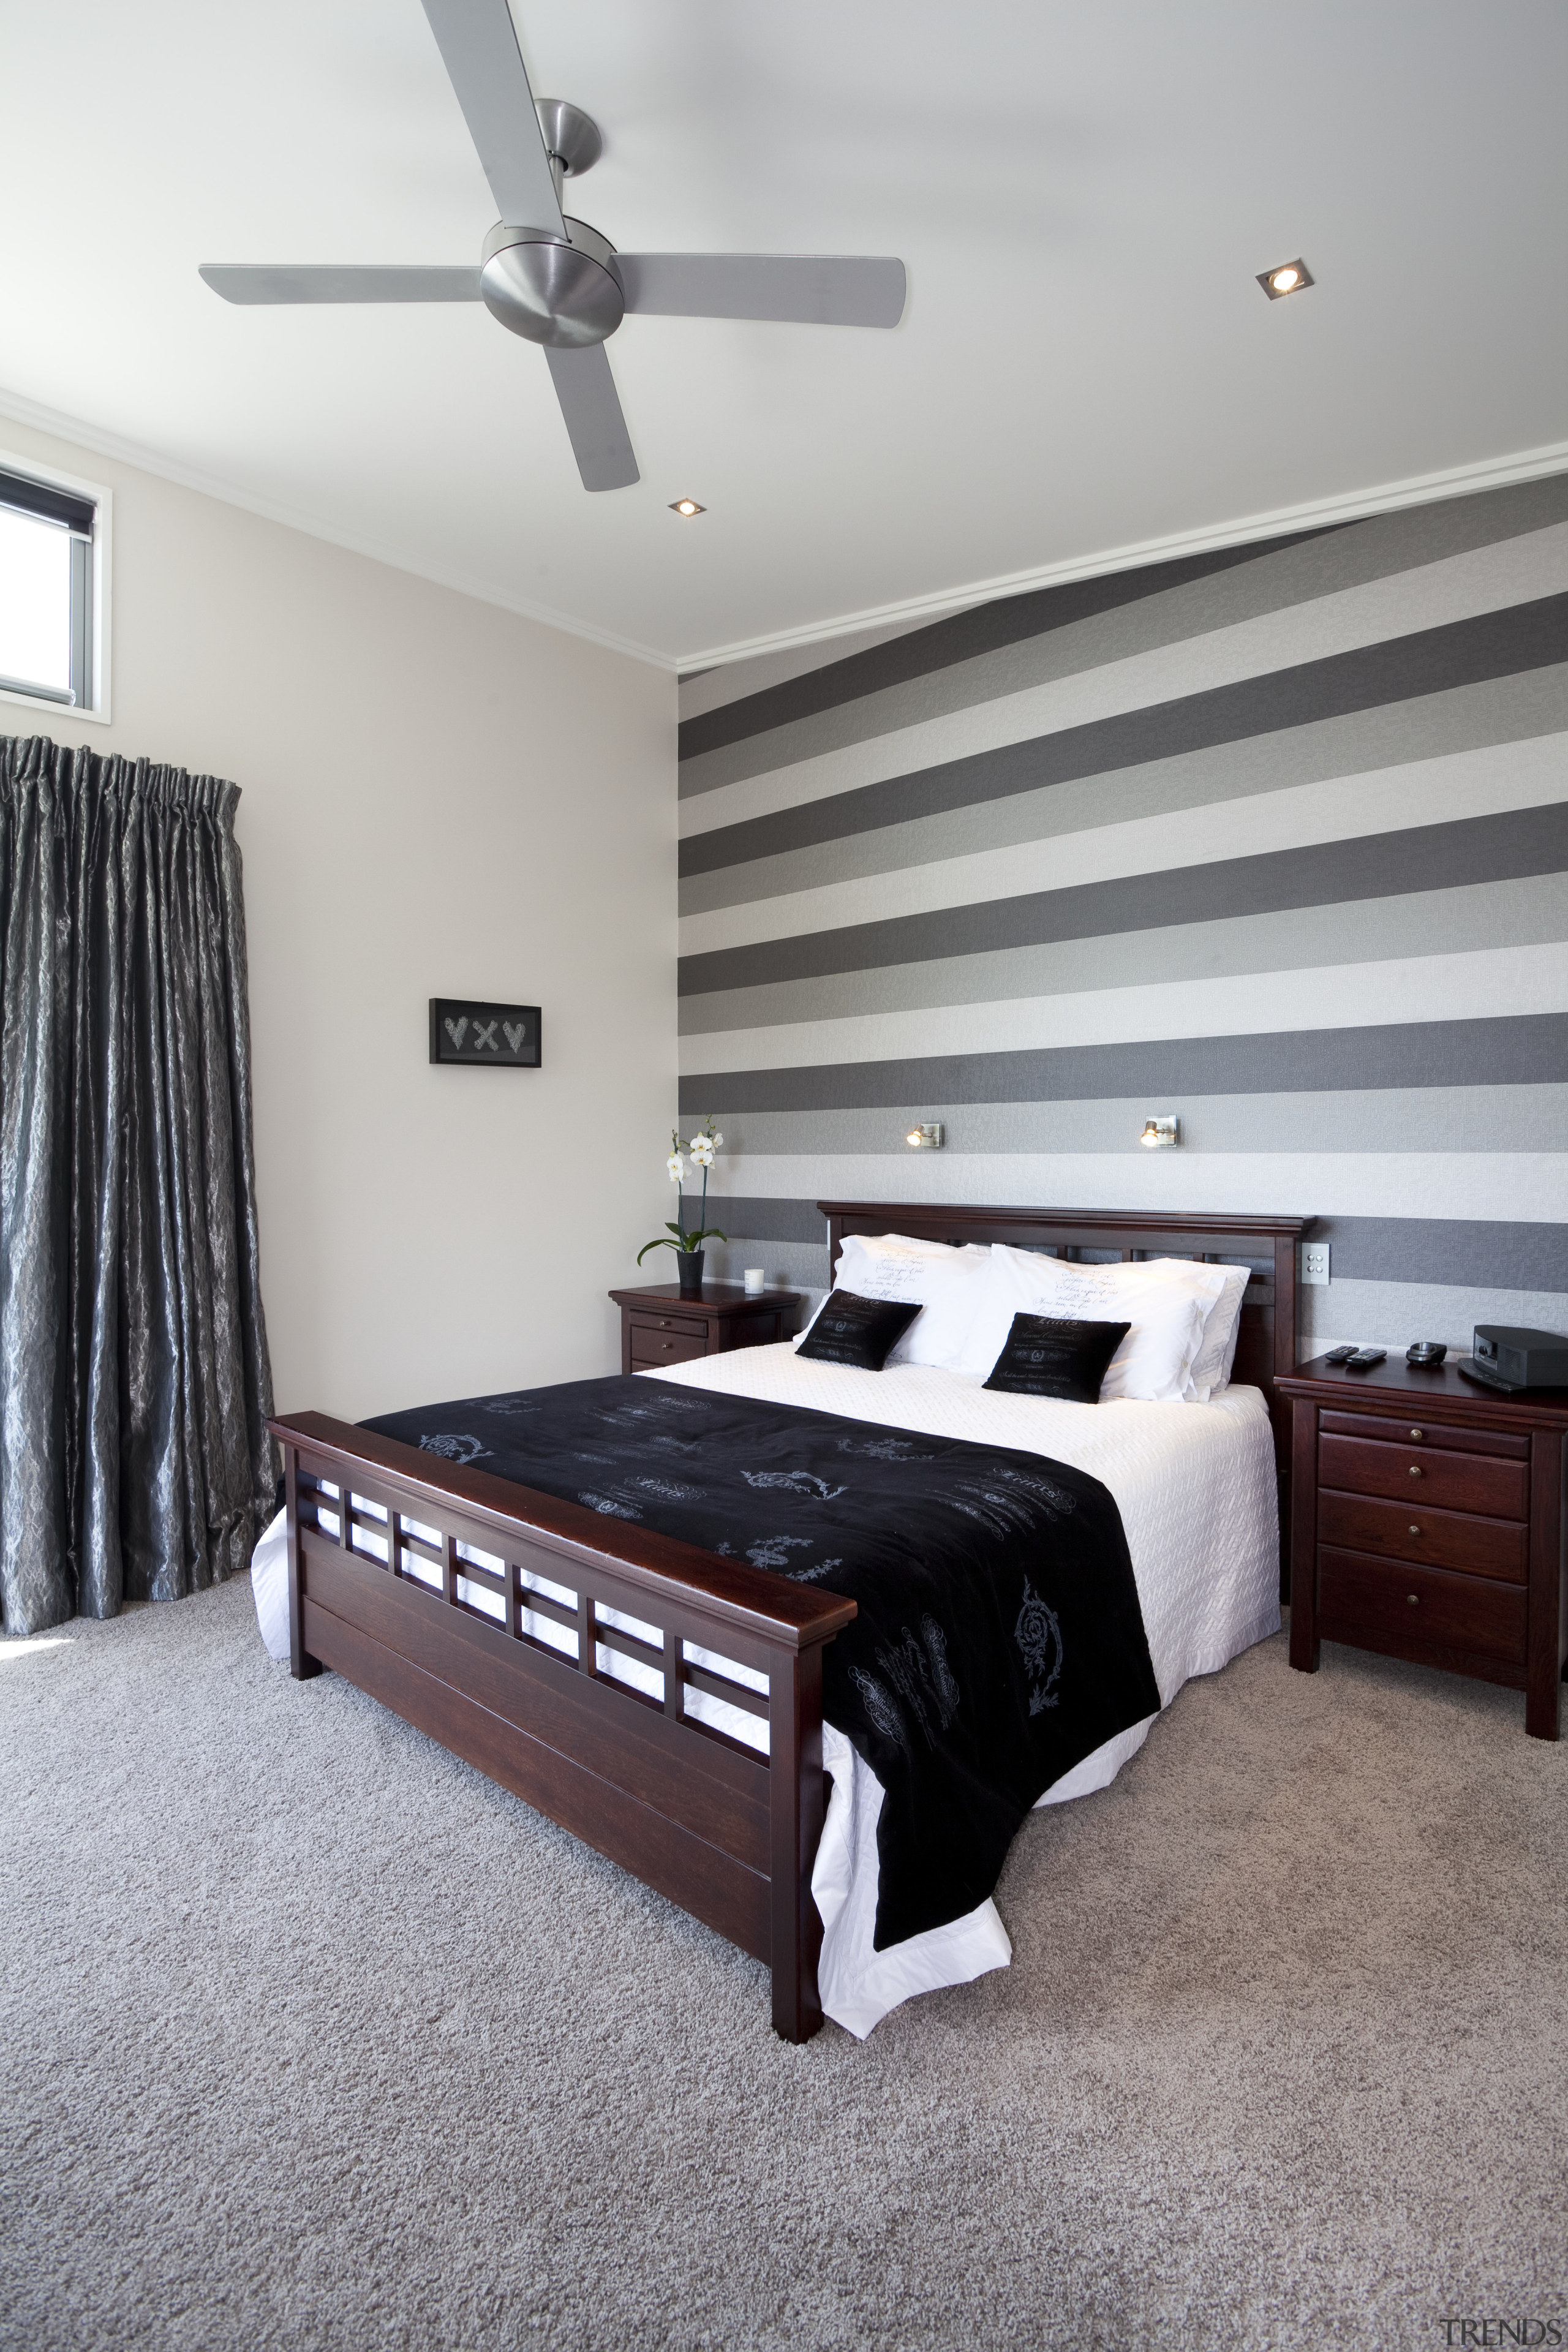 The flooring for this Otago home was chosen bed, bed frame, bedroom, ceiling, floor, flooring, furniture, home, interior design, property, real estate, room, wall, wood, gray